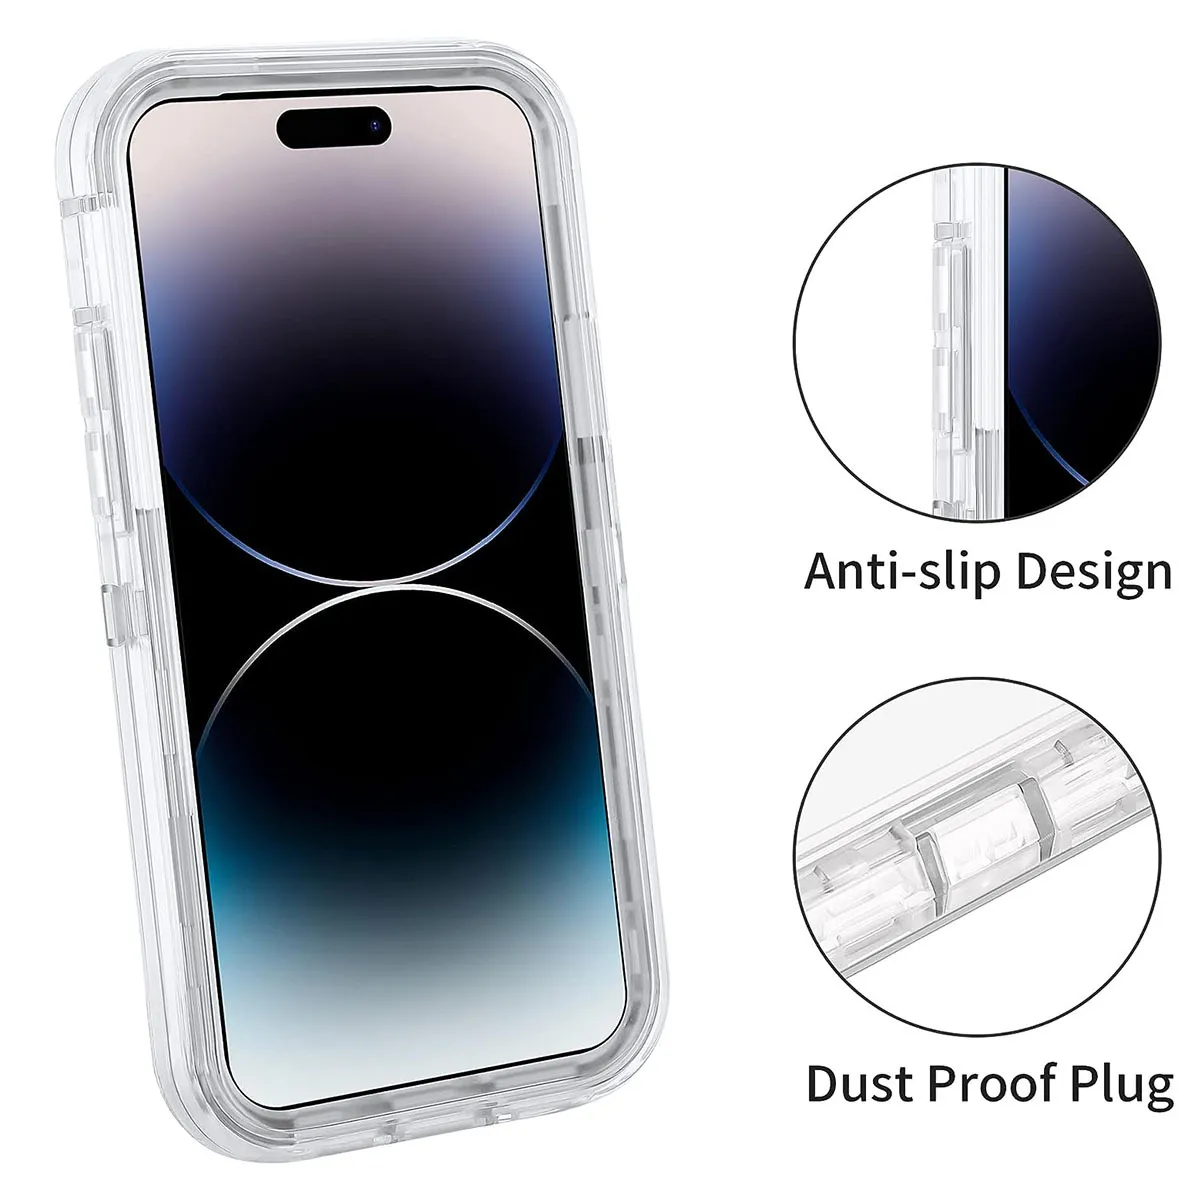 Heavy-Duty Protective iPhone 14 Pro Max Clear Case: Superior Dual-Layer Design, Shockproof PC Bumper, Soft TPU Back for Enhanced Grip